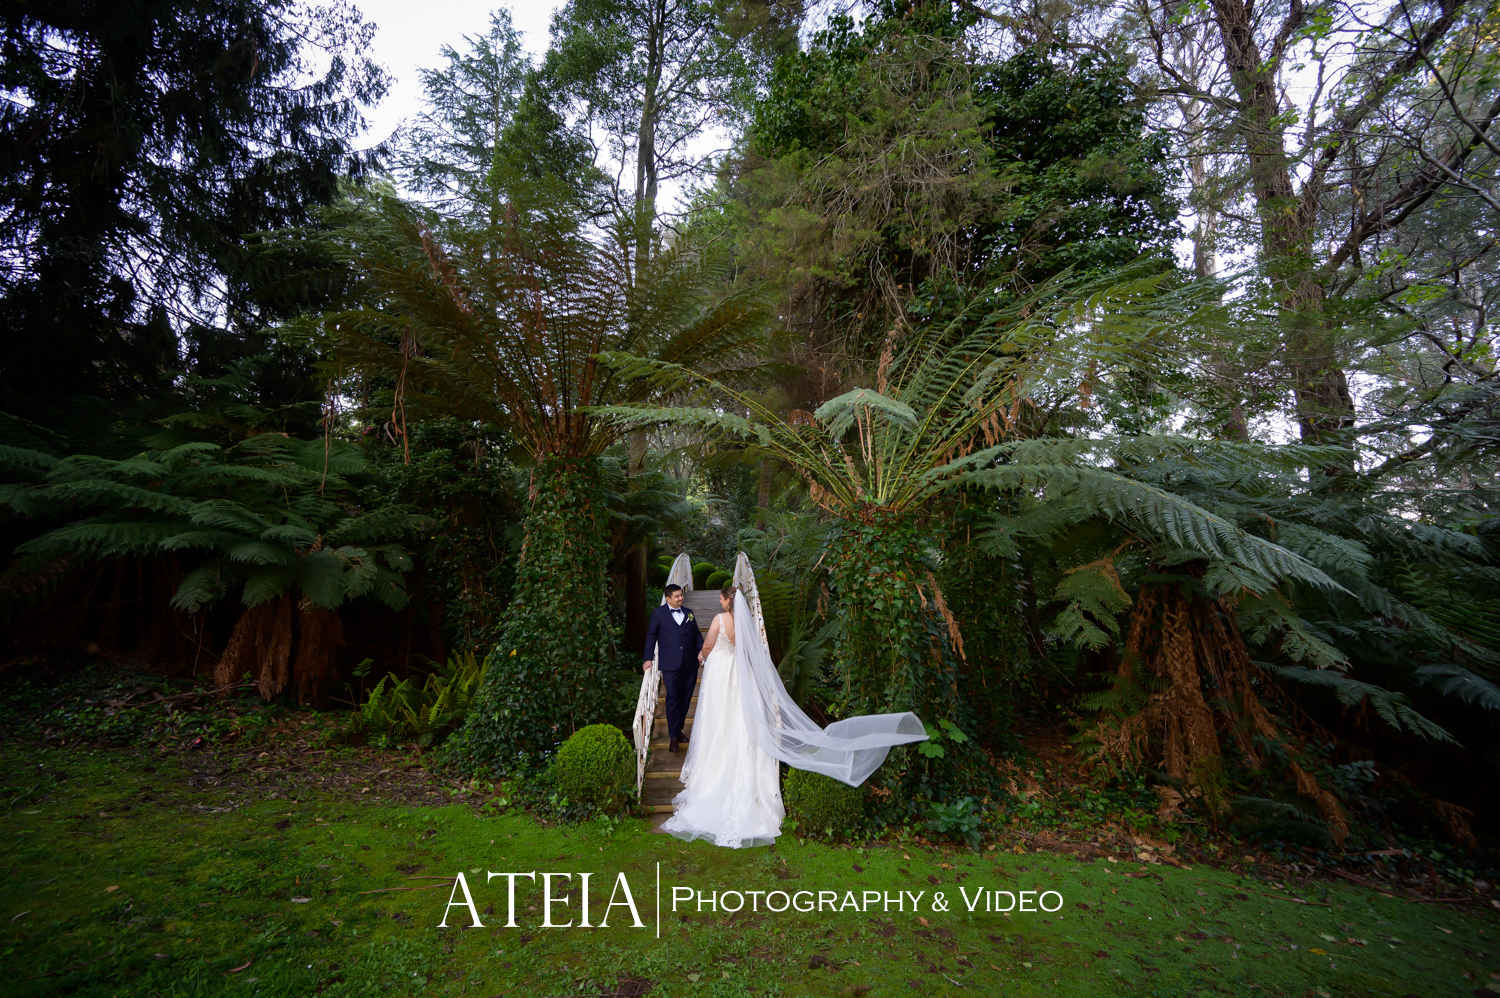 , Alicia and Harren&#8217;s wedding photography at Tatra Receptions Mount Dandenong captured by ATEIA Photography &#038; Video